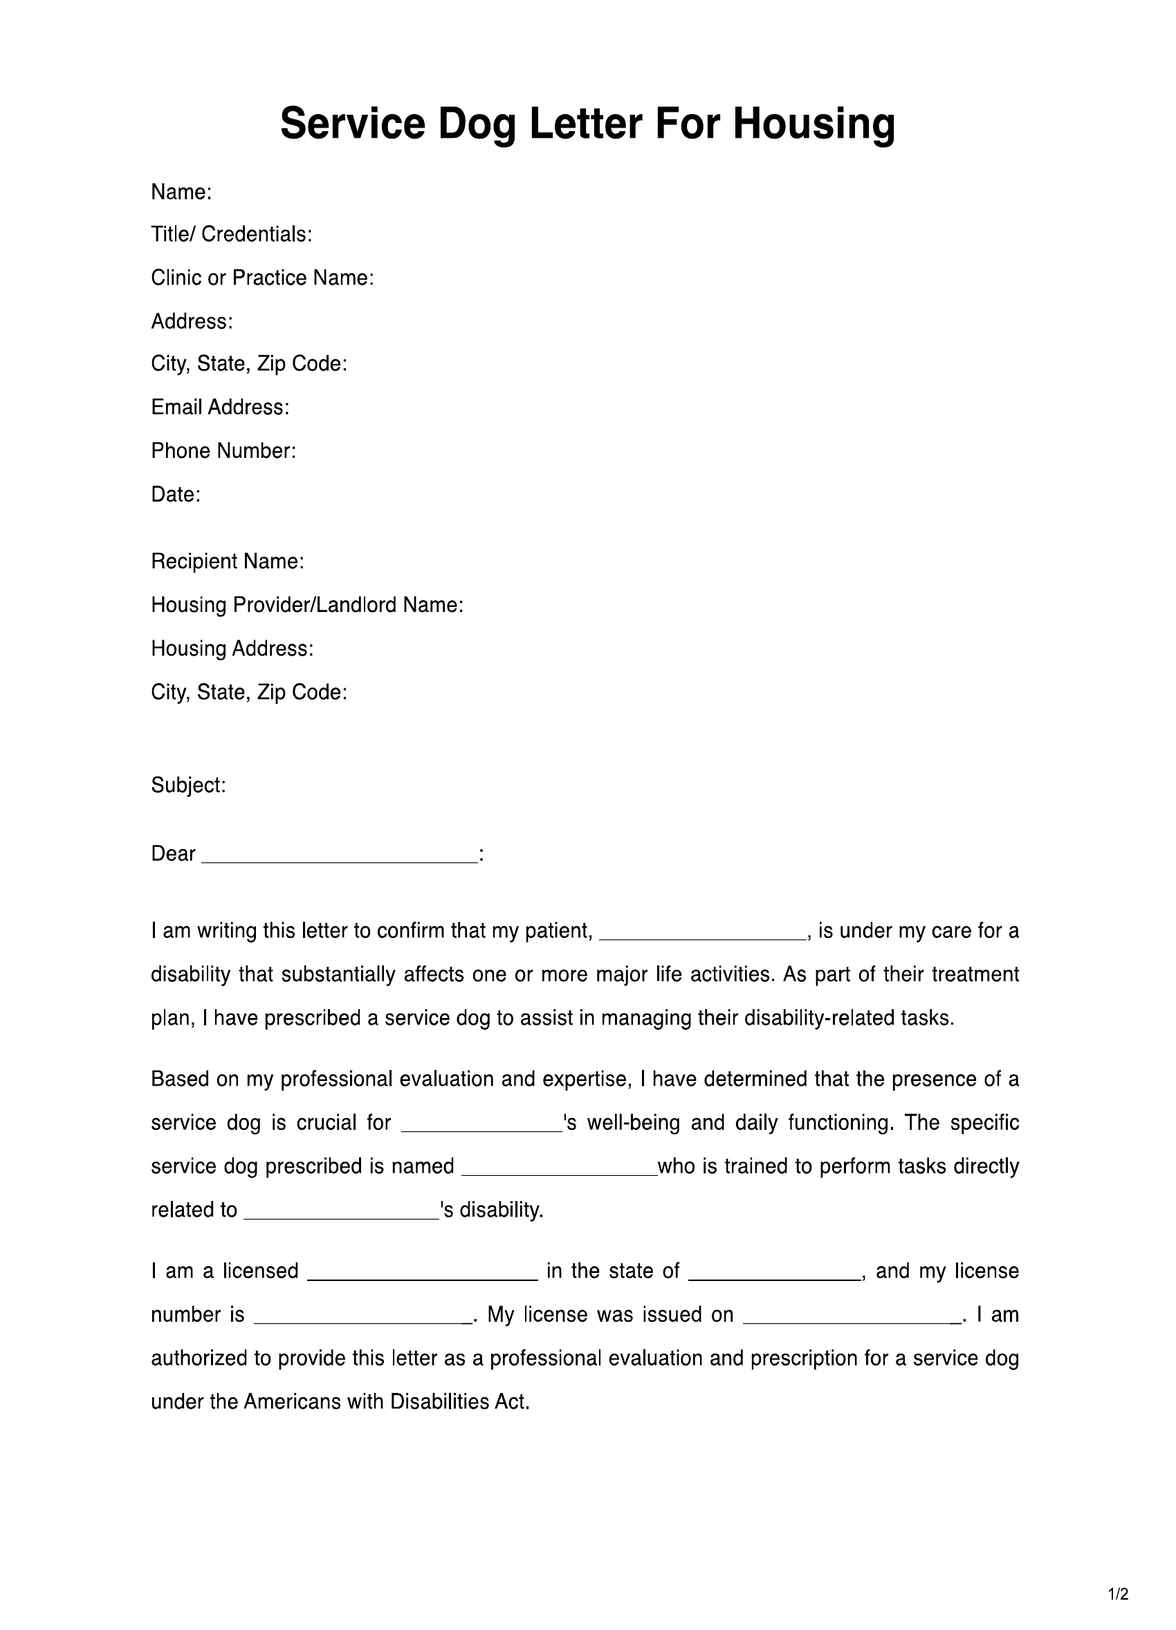 Service Dog Letter For Housing PDF Example